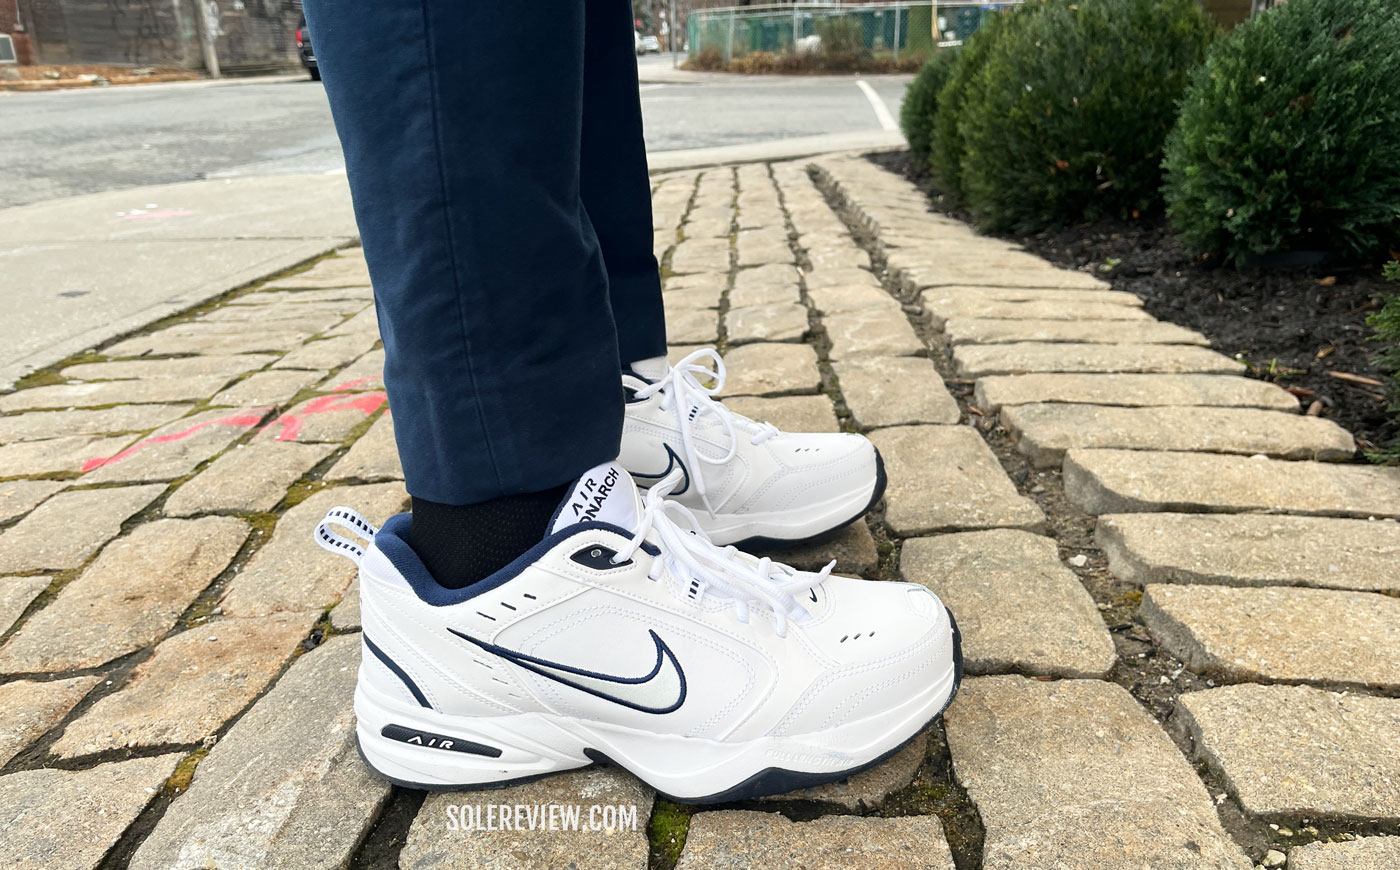 Standing in the Nike Monarch IV.